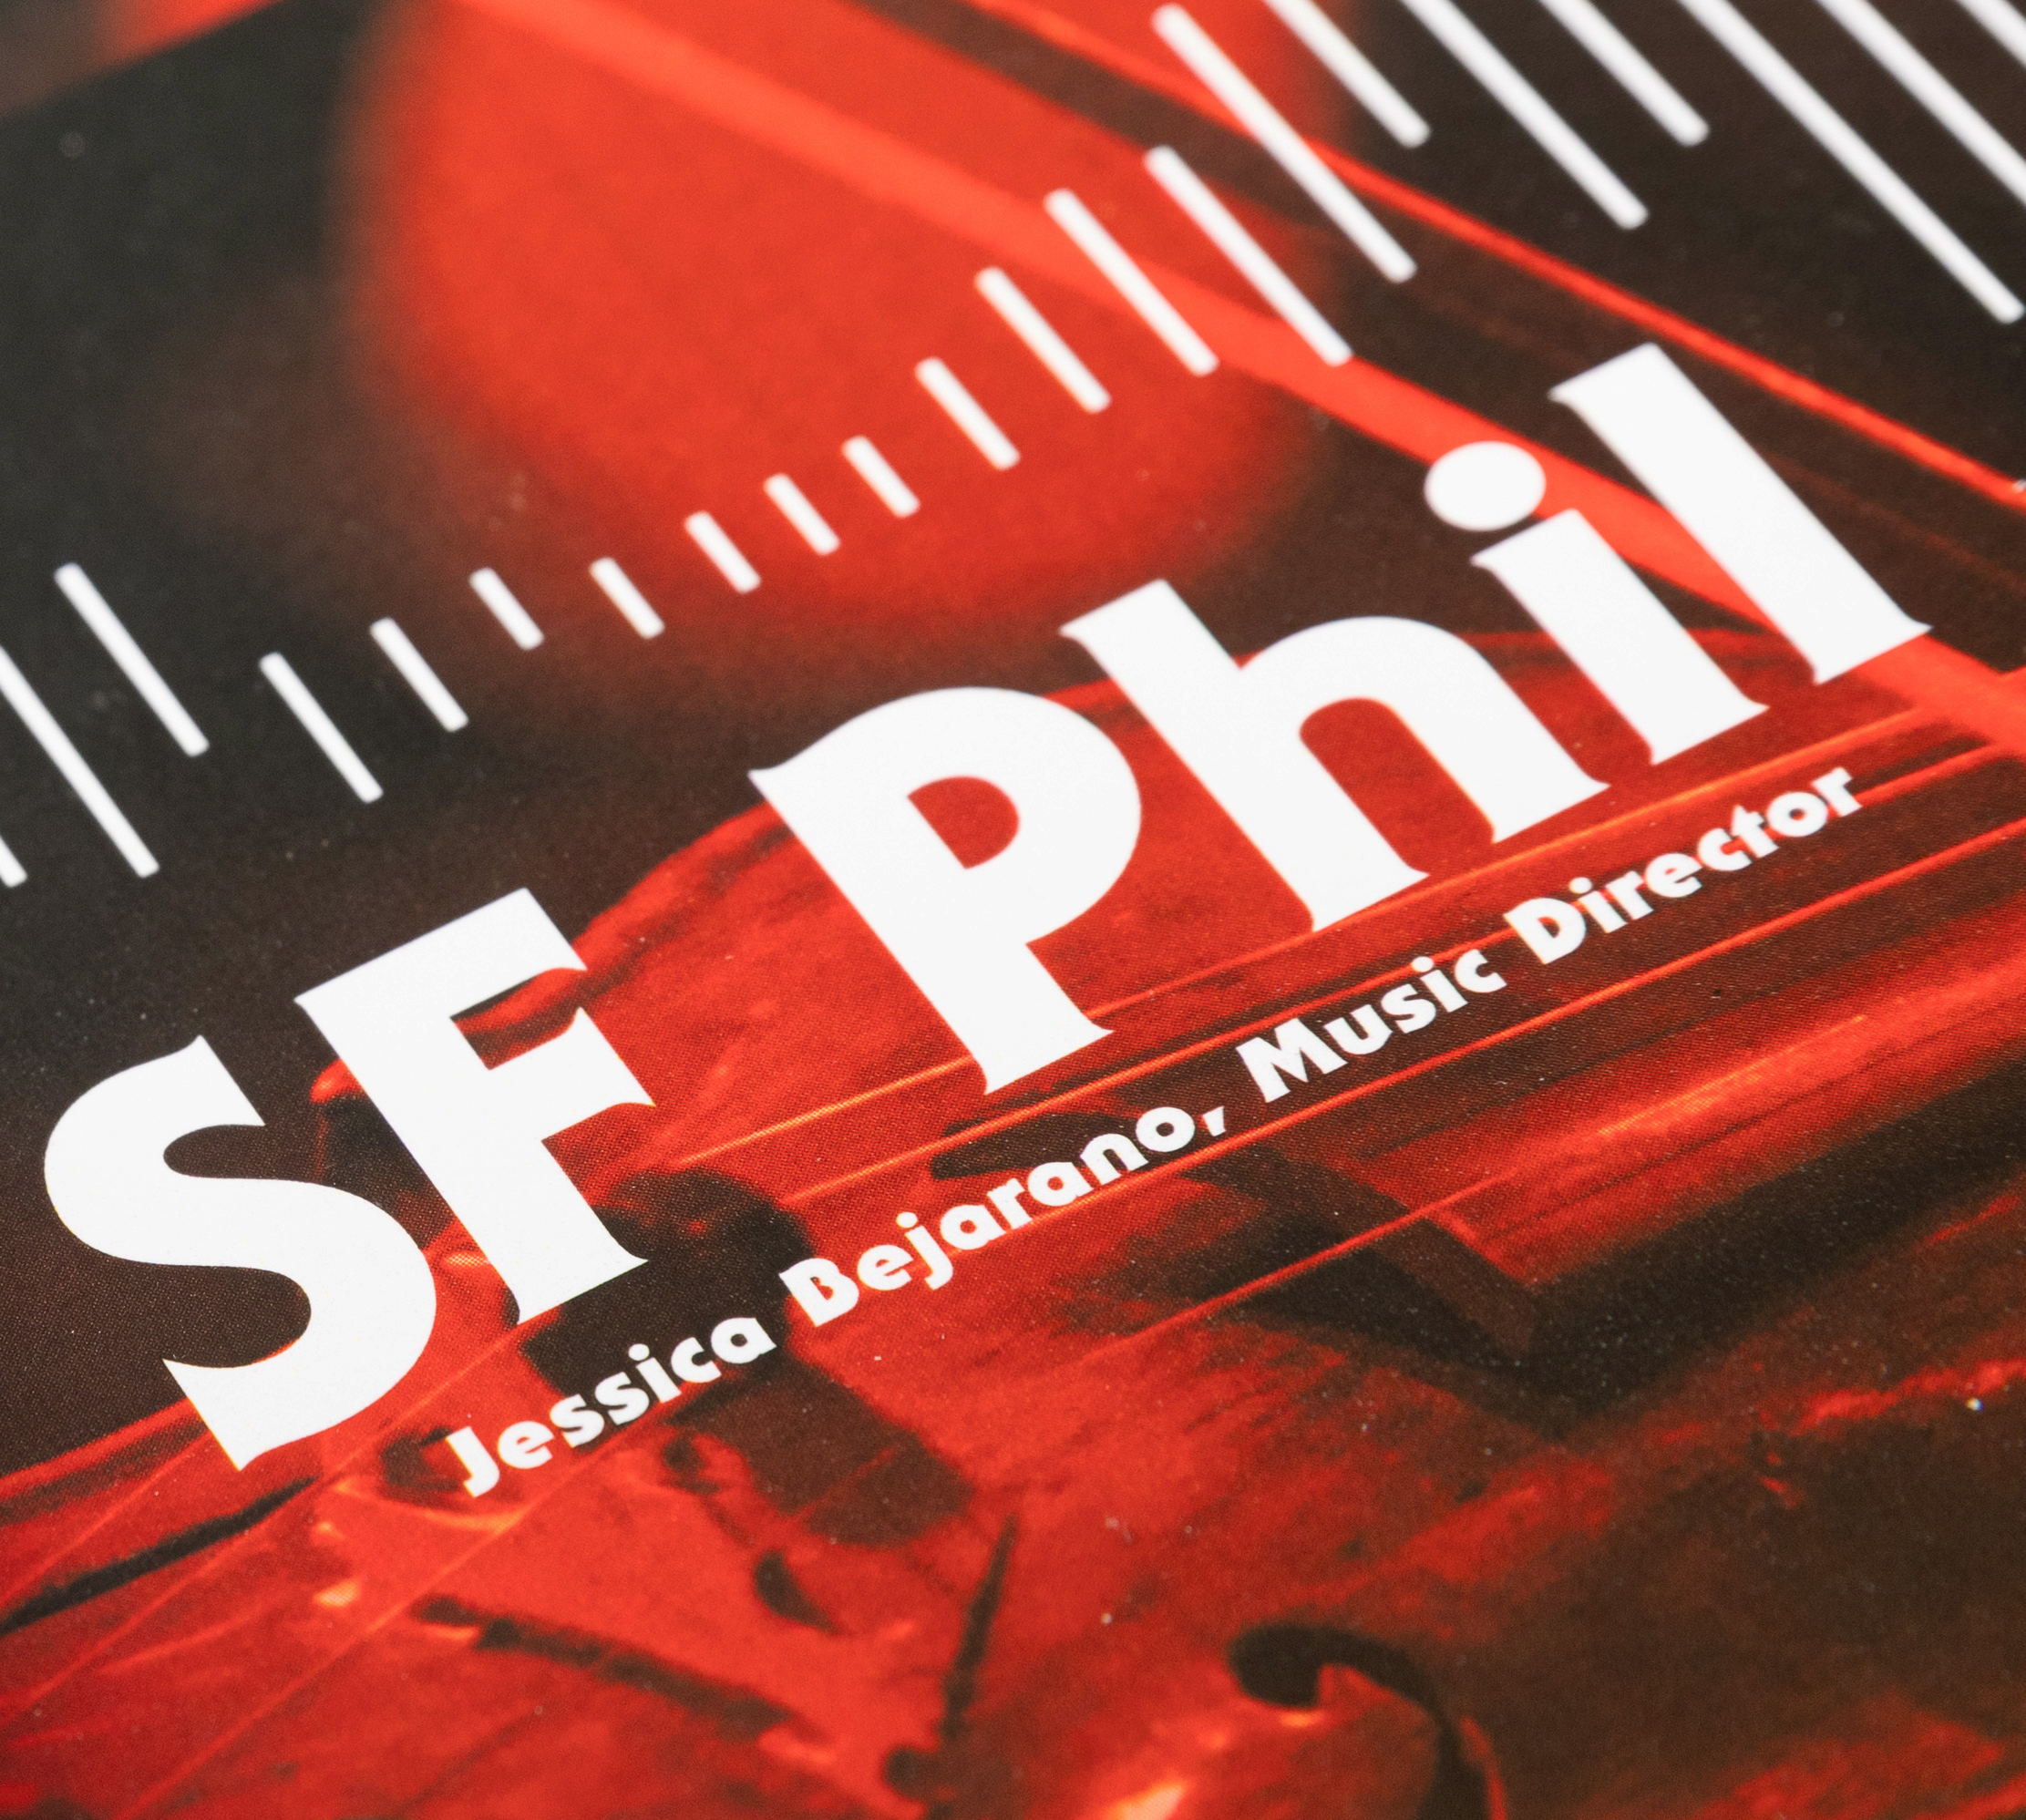 The image shows a red-toned promotional poster with the bold white text &quot;SF Phil&quot; and &quot;Jessica Bejarano, Music Director&quot; below it, featuring musical notes.